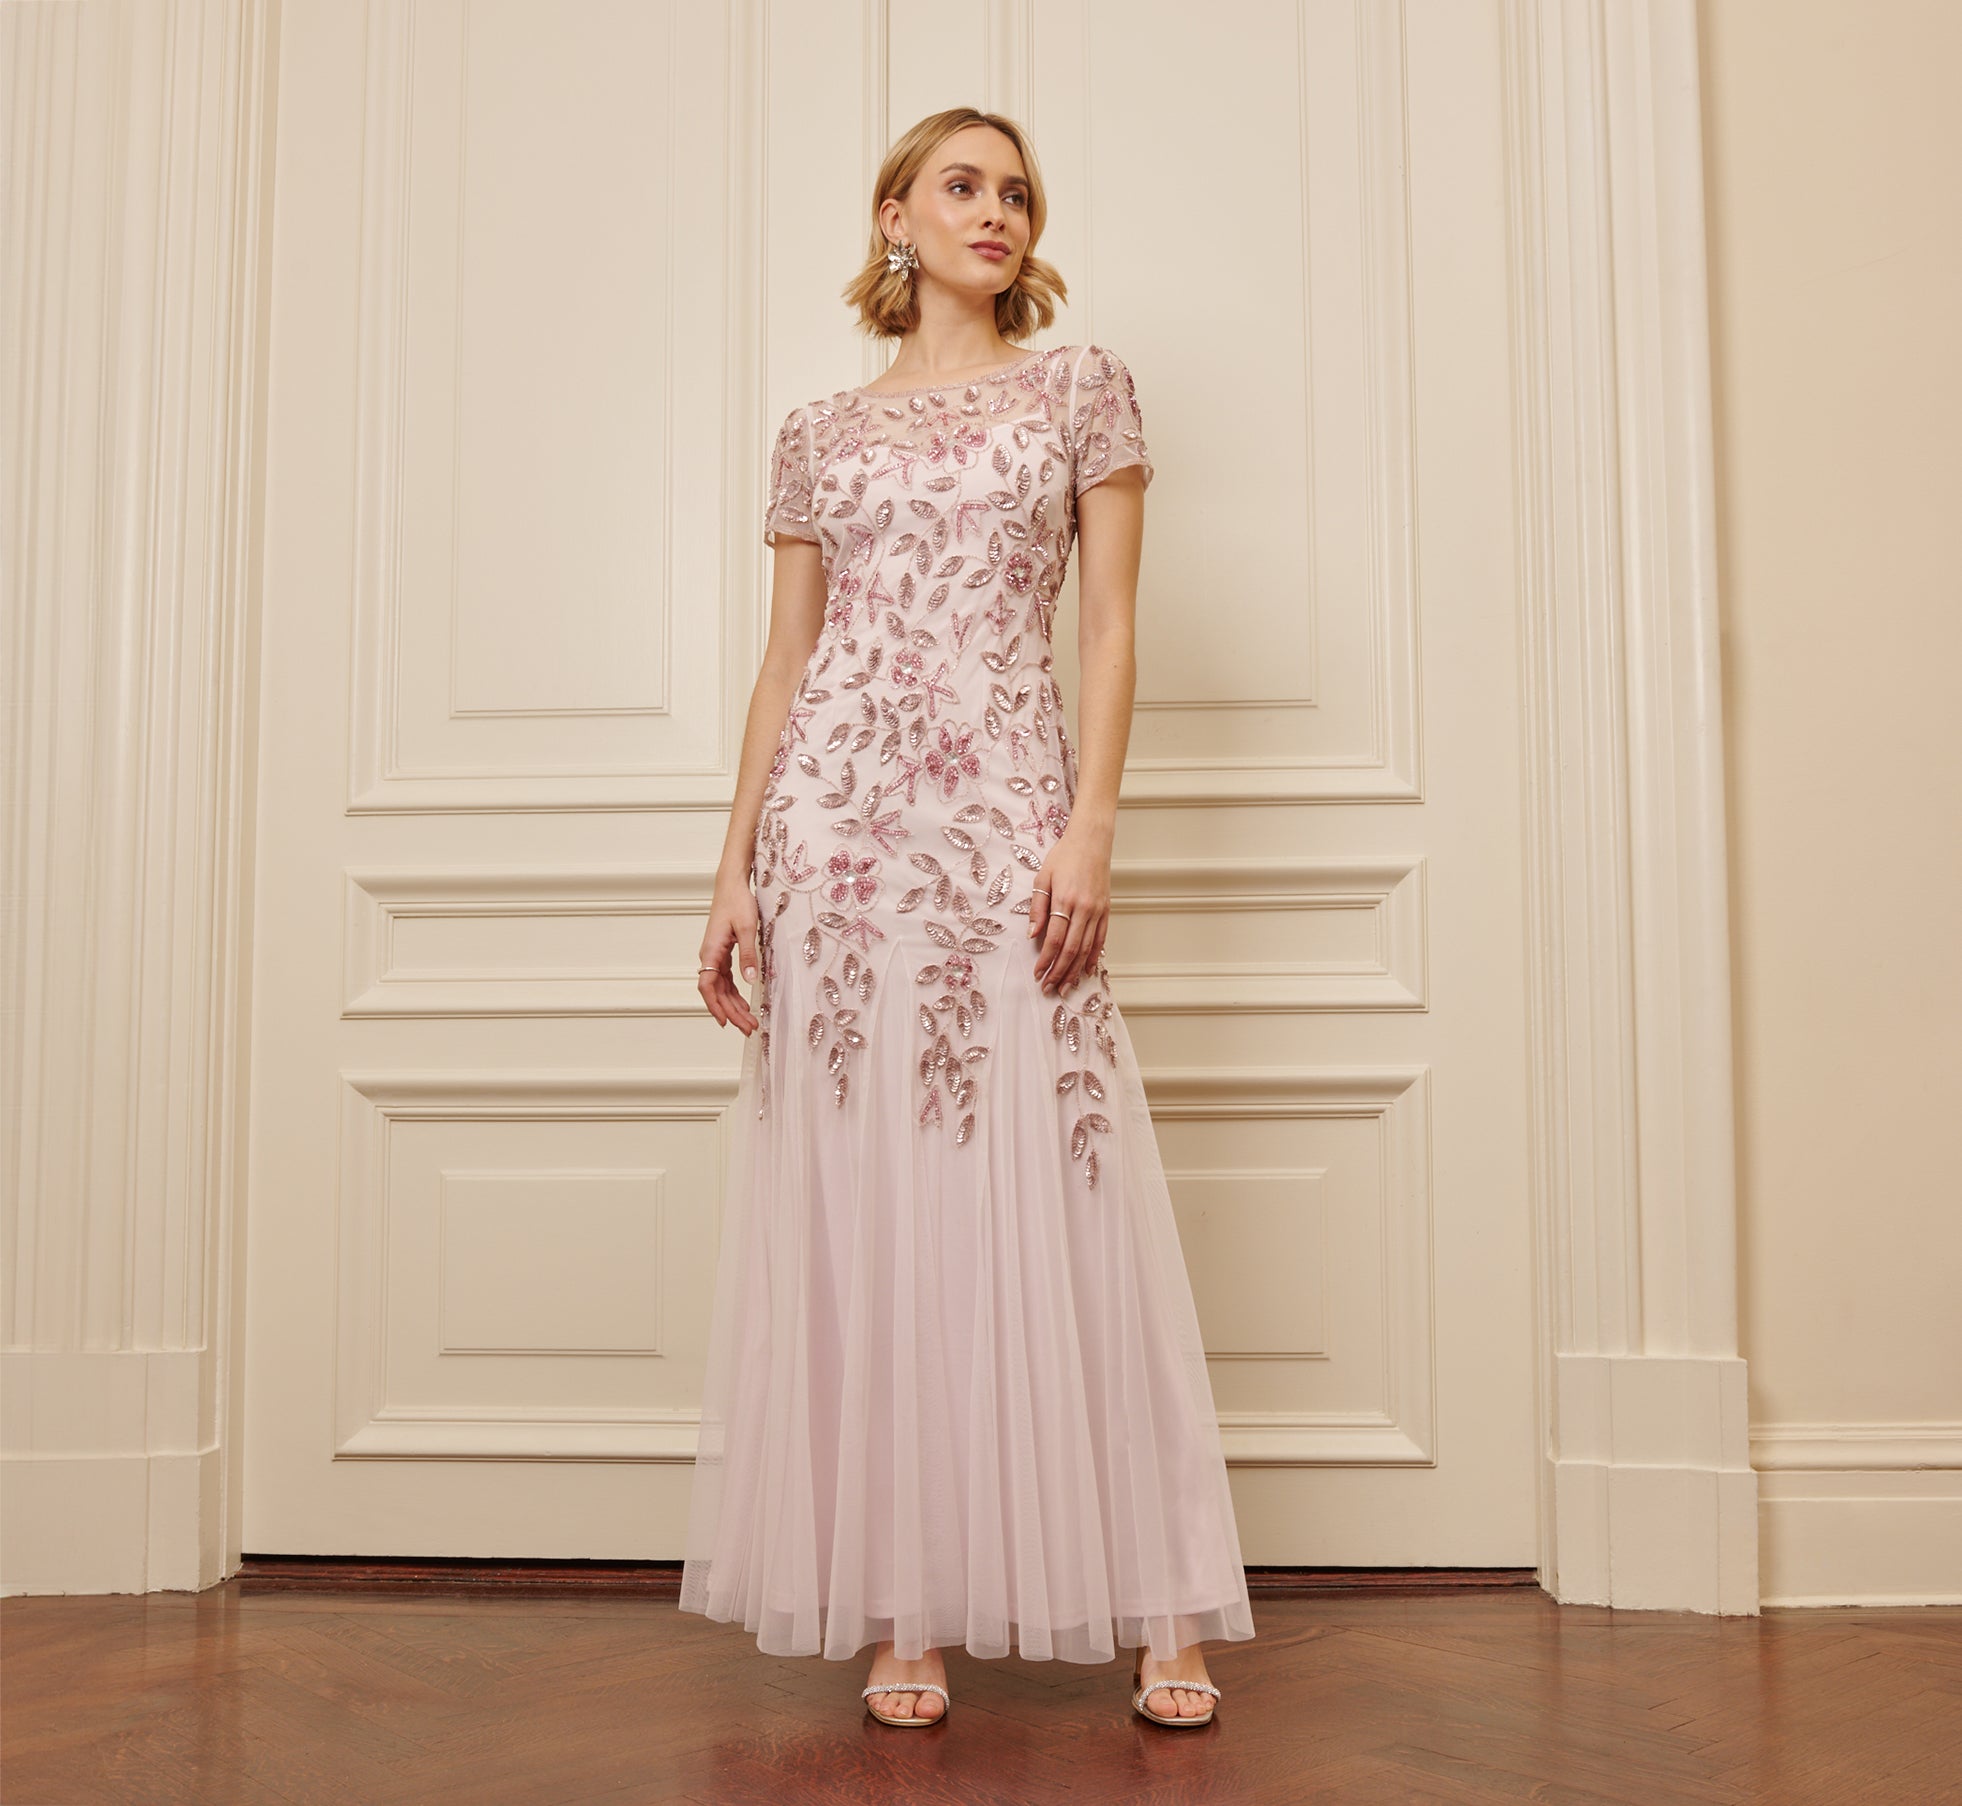 Hand Beaded Short Sleeve Floral Godet Gown In Blush Pink